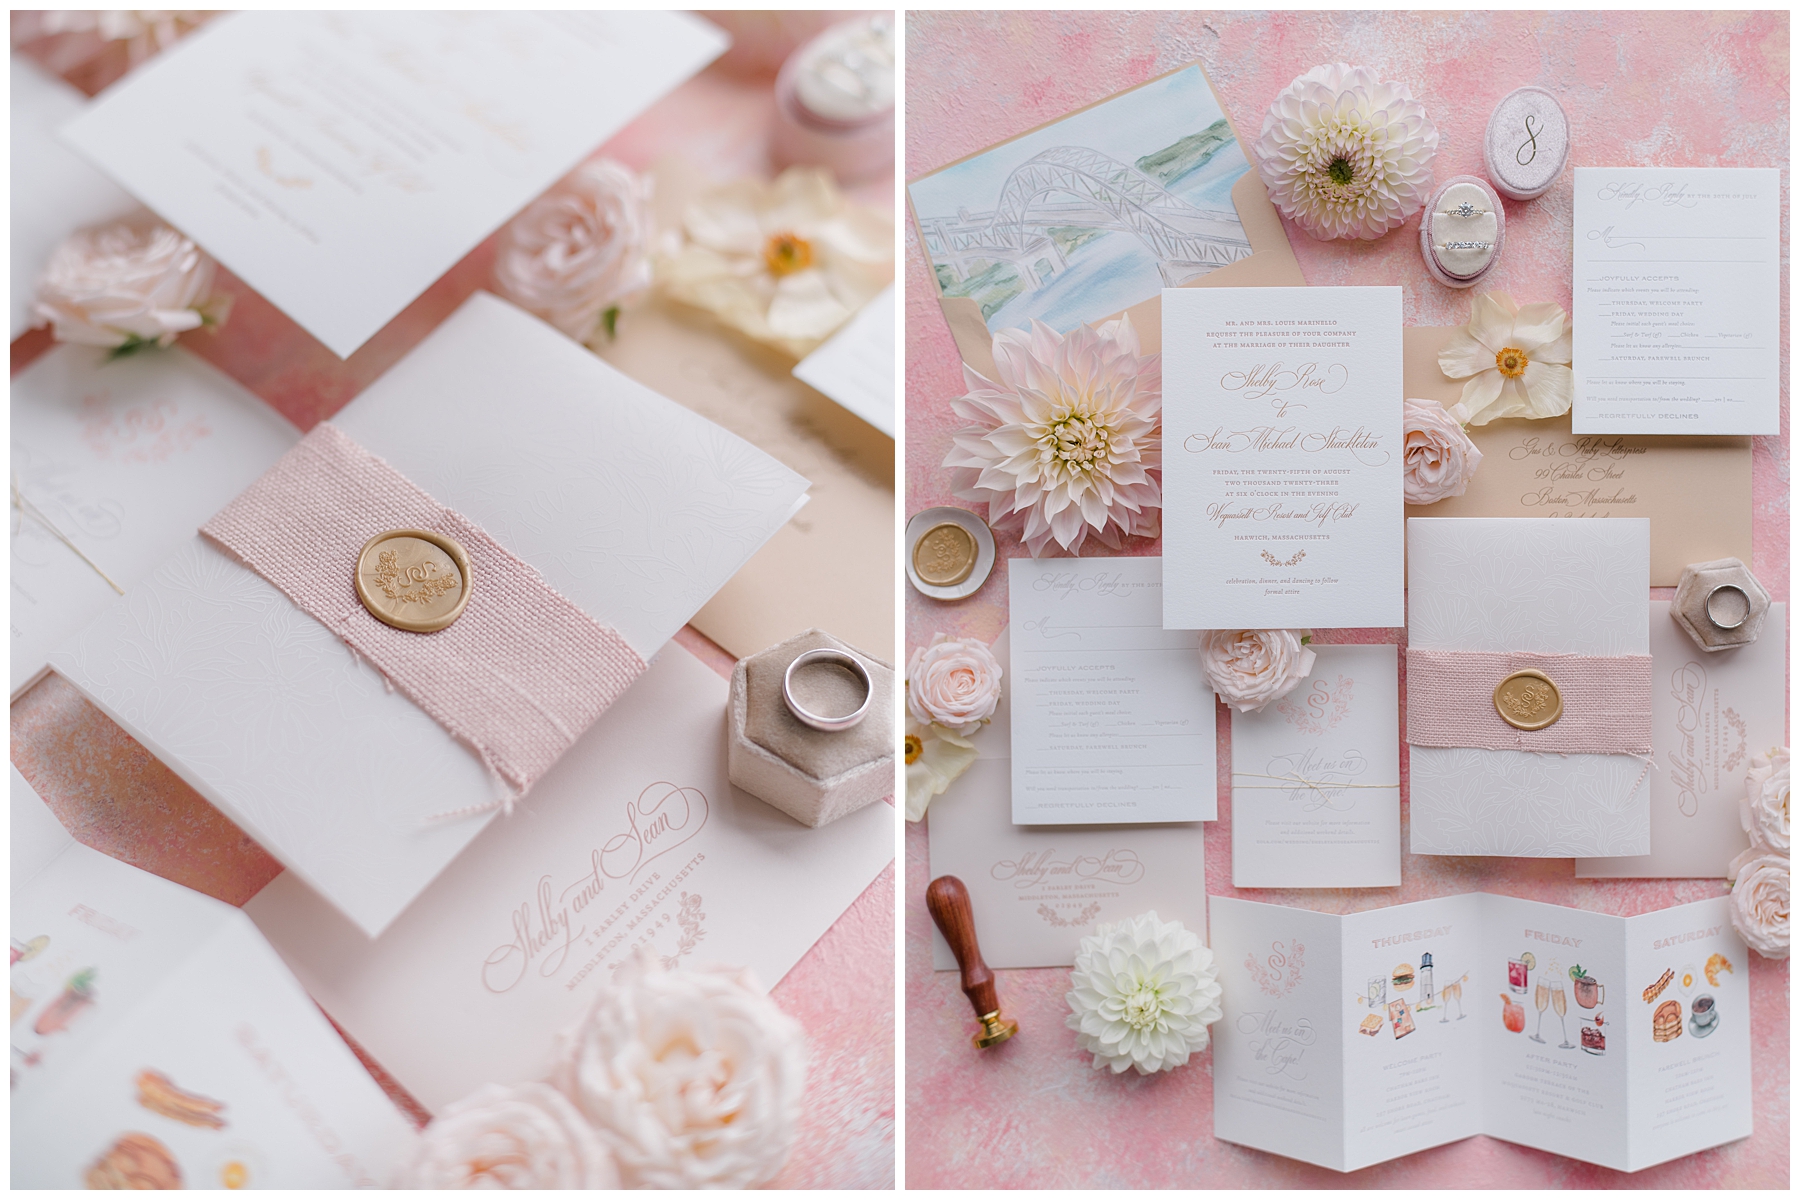 romantic wedding details and flat lay design